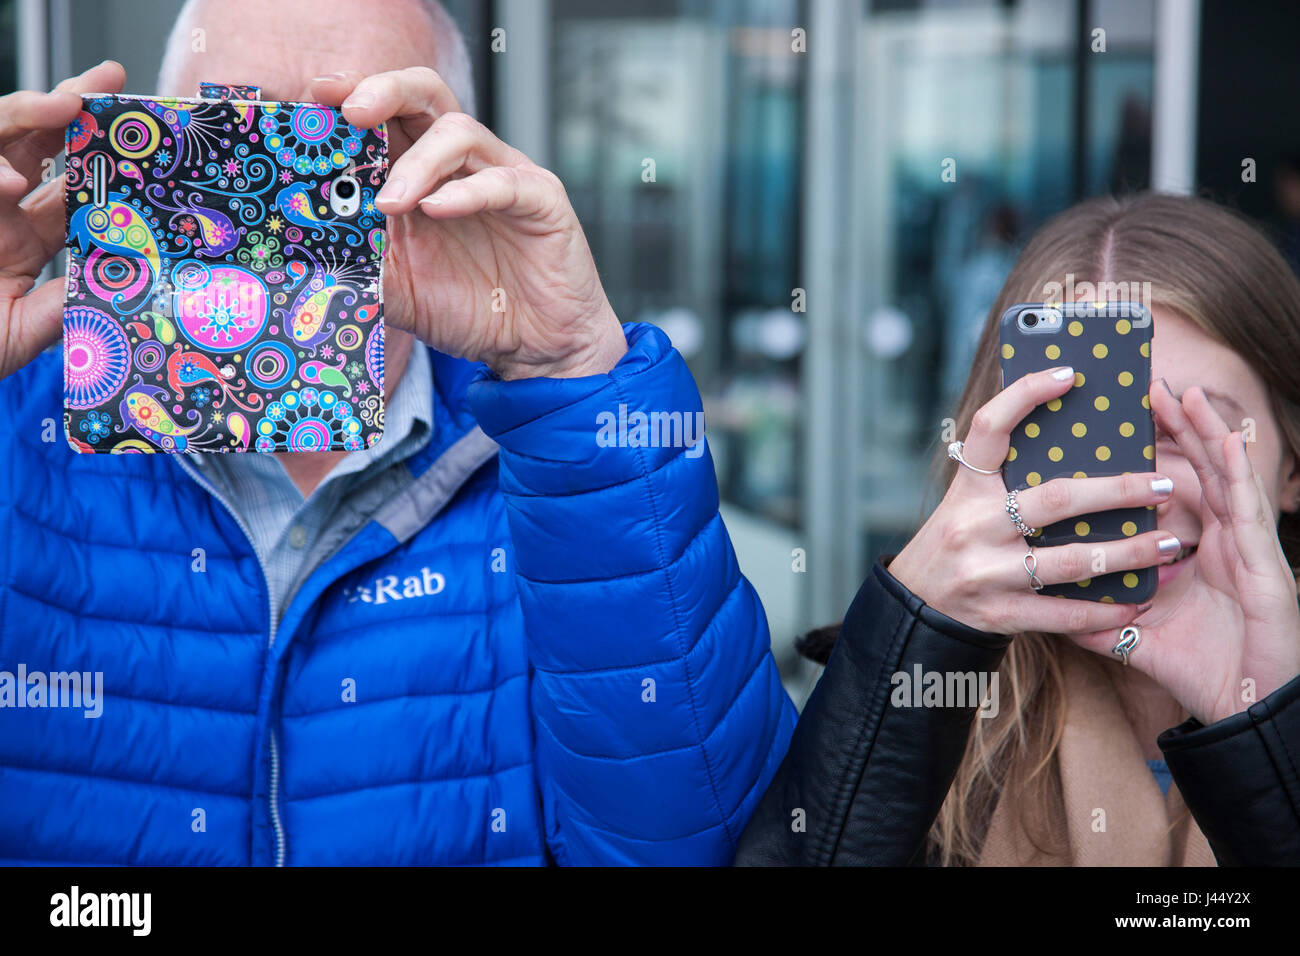 camera phones held up covering faces as man and woman take photographs Stock Photo